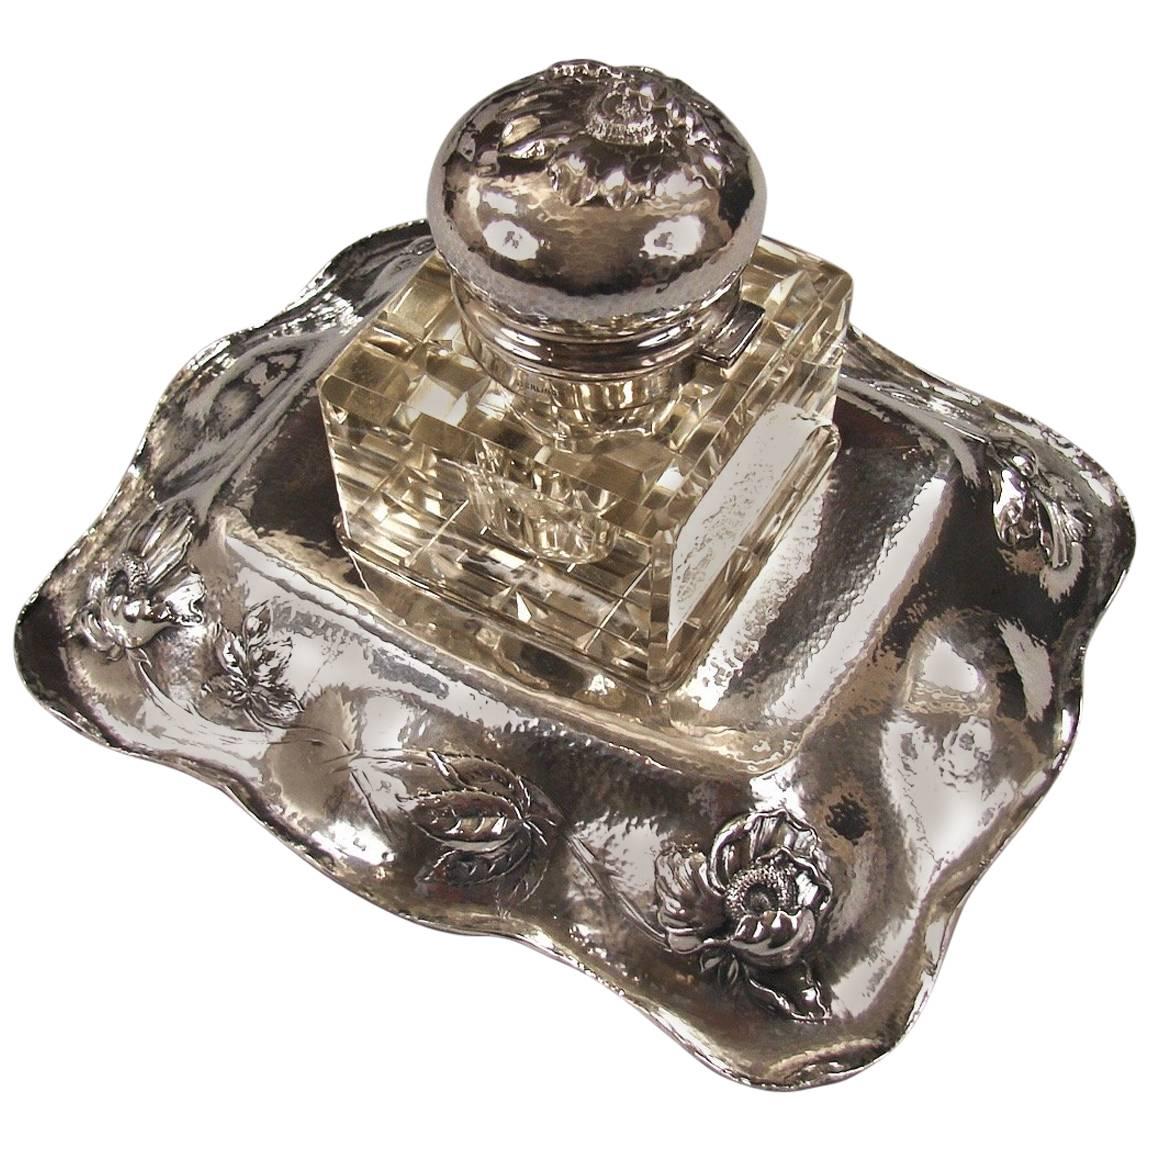 American Art Nouveau Sterling Silver Inkstand by Barbour Silver Company